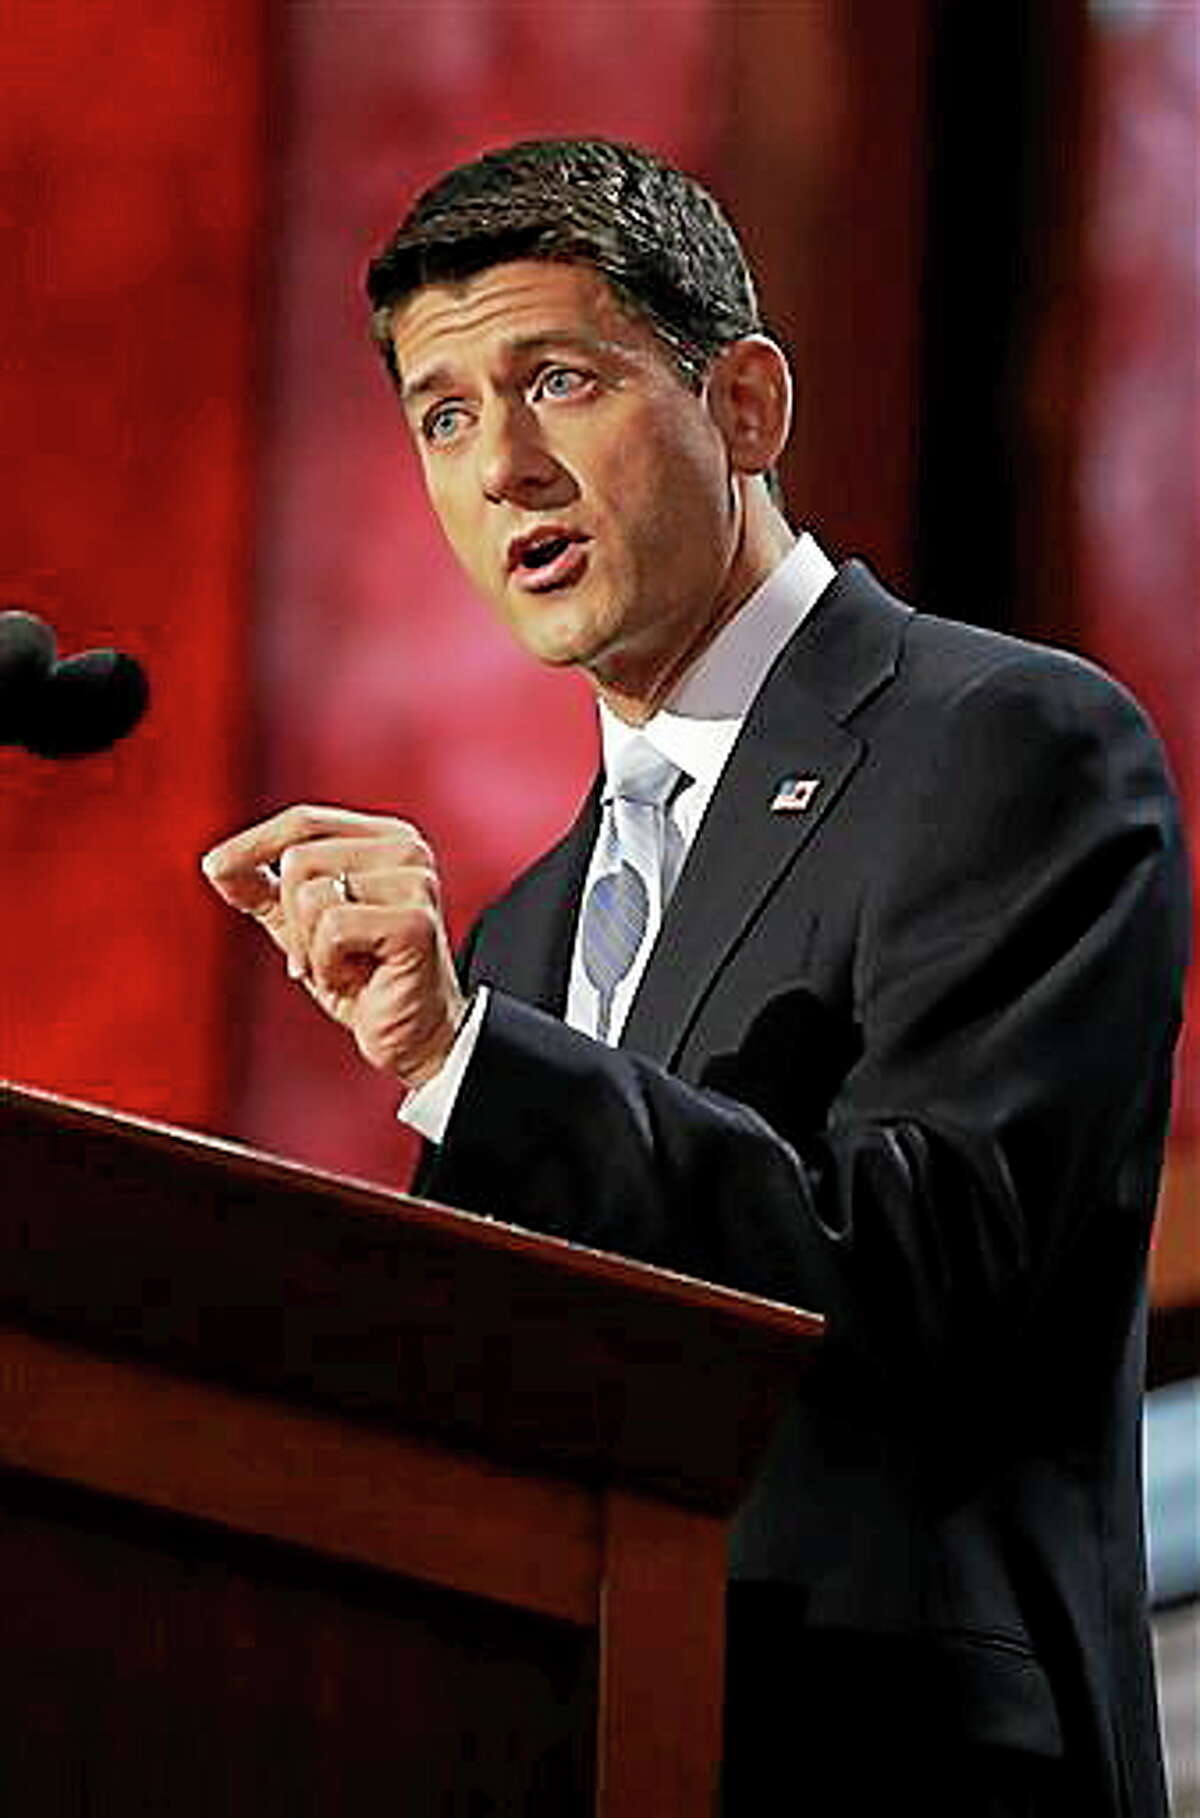 In this file photo, Republican vice presidential nominee, Rep. Paul Ryan, R-Wis., addresses the Republican National Convention in Tampa, Fla., in August of 2012.